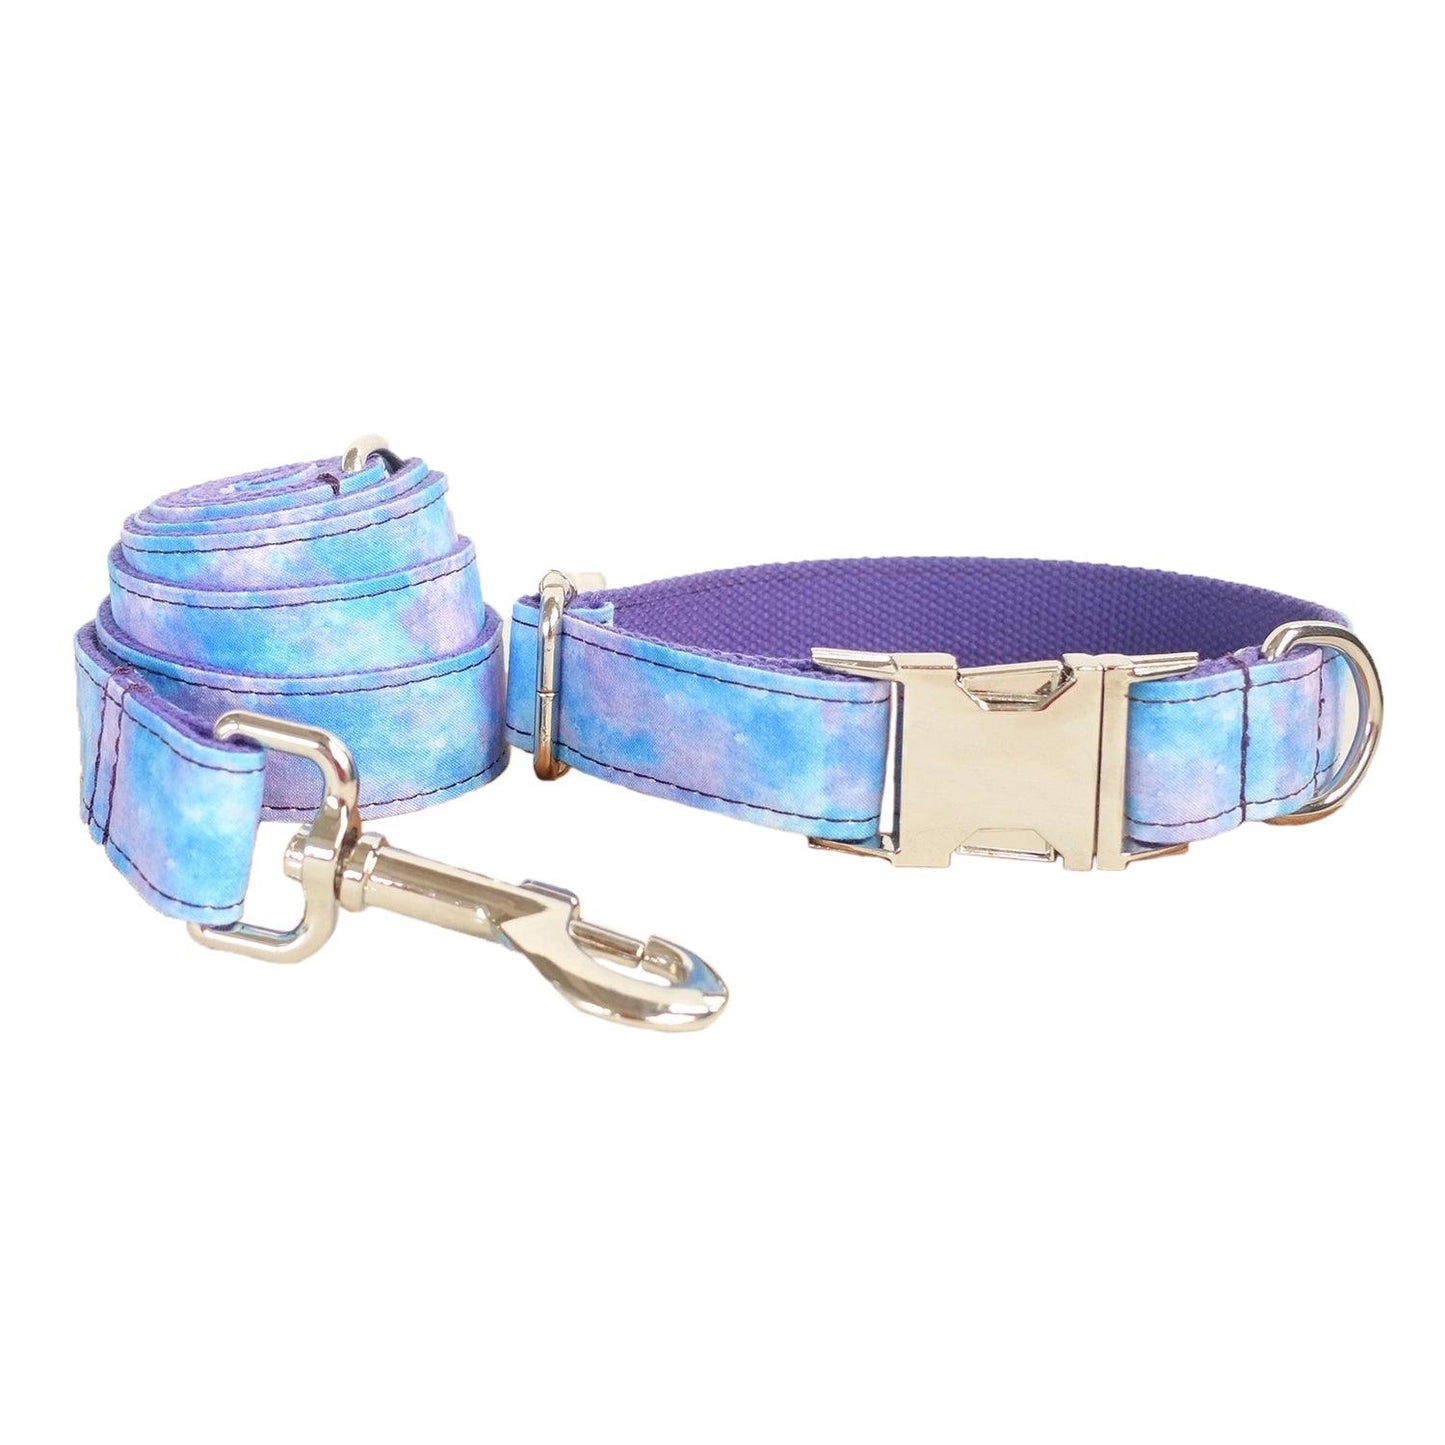 Teal Print Point Soft Personalized Dog Collar Set - iTalkPet